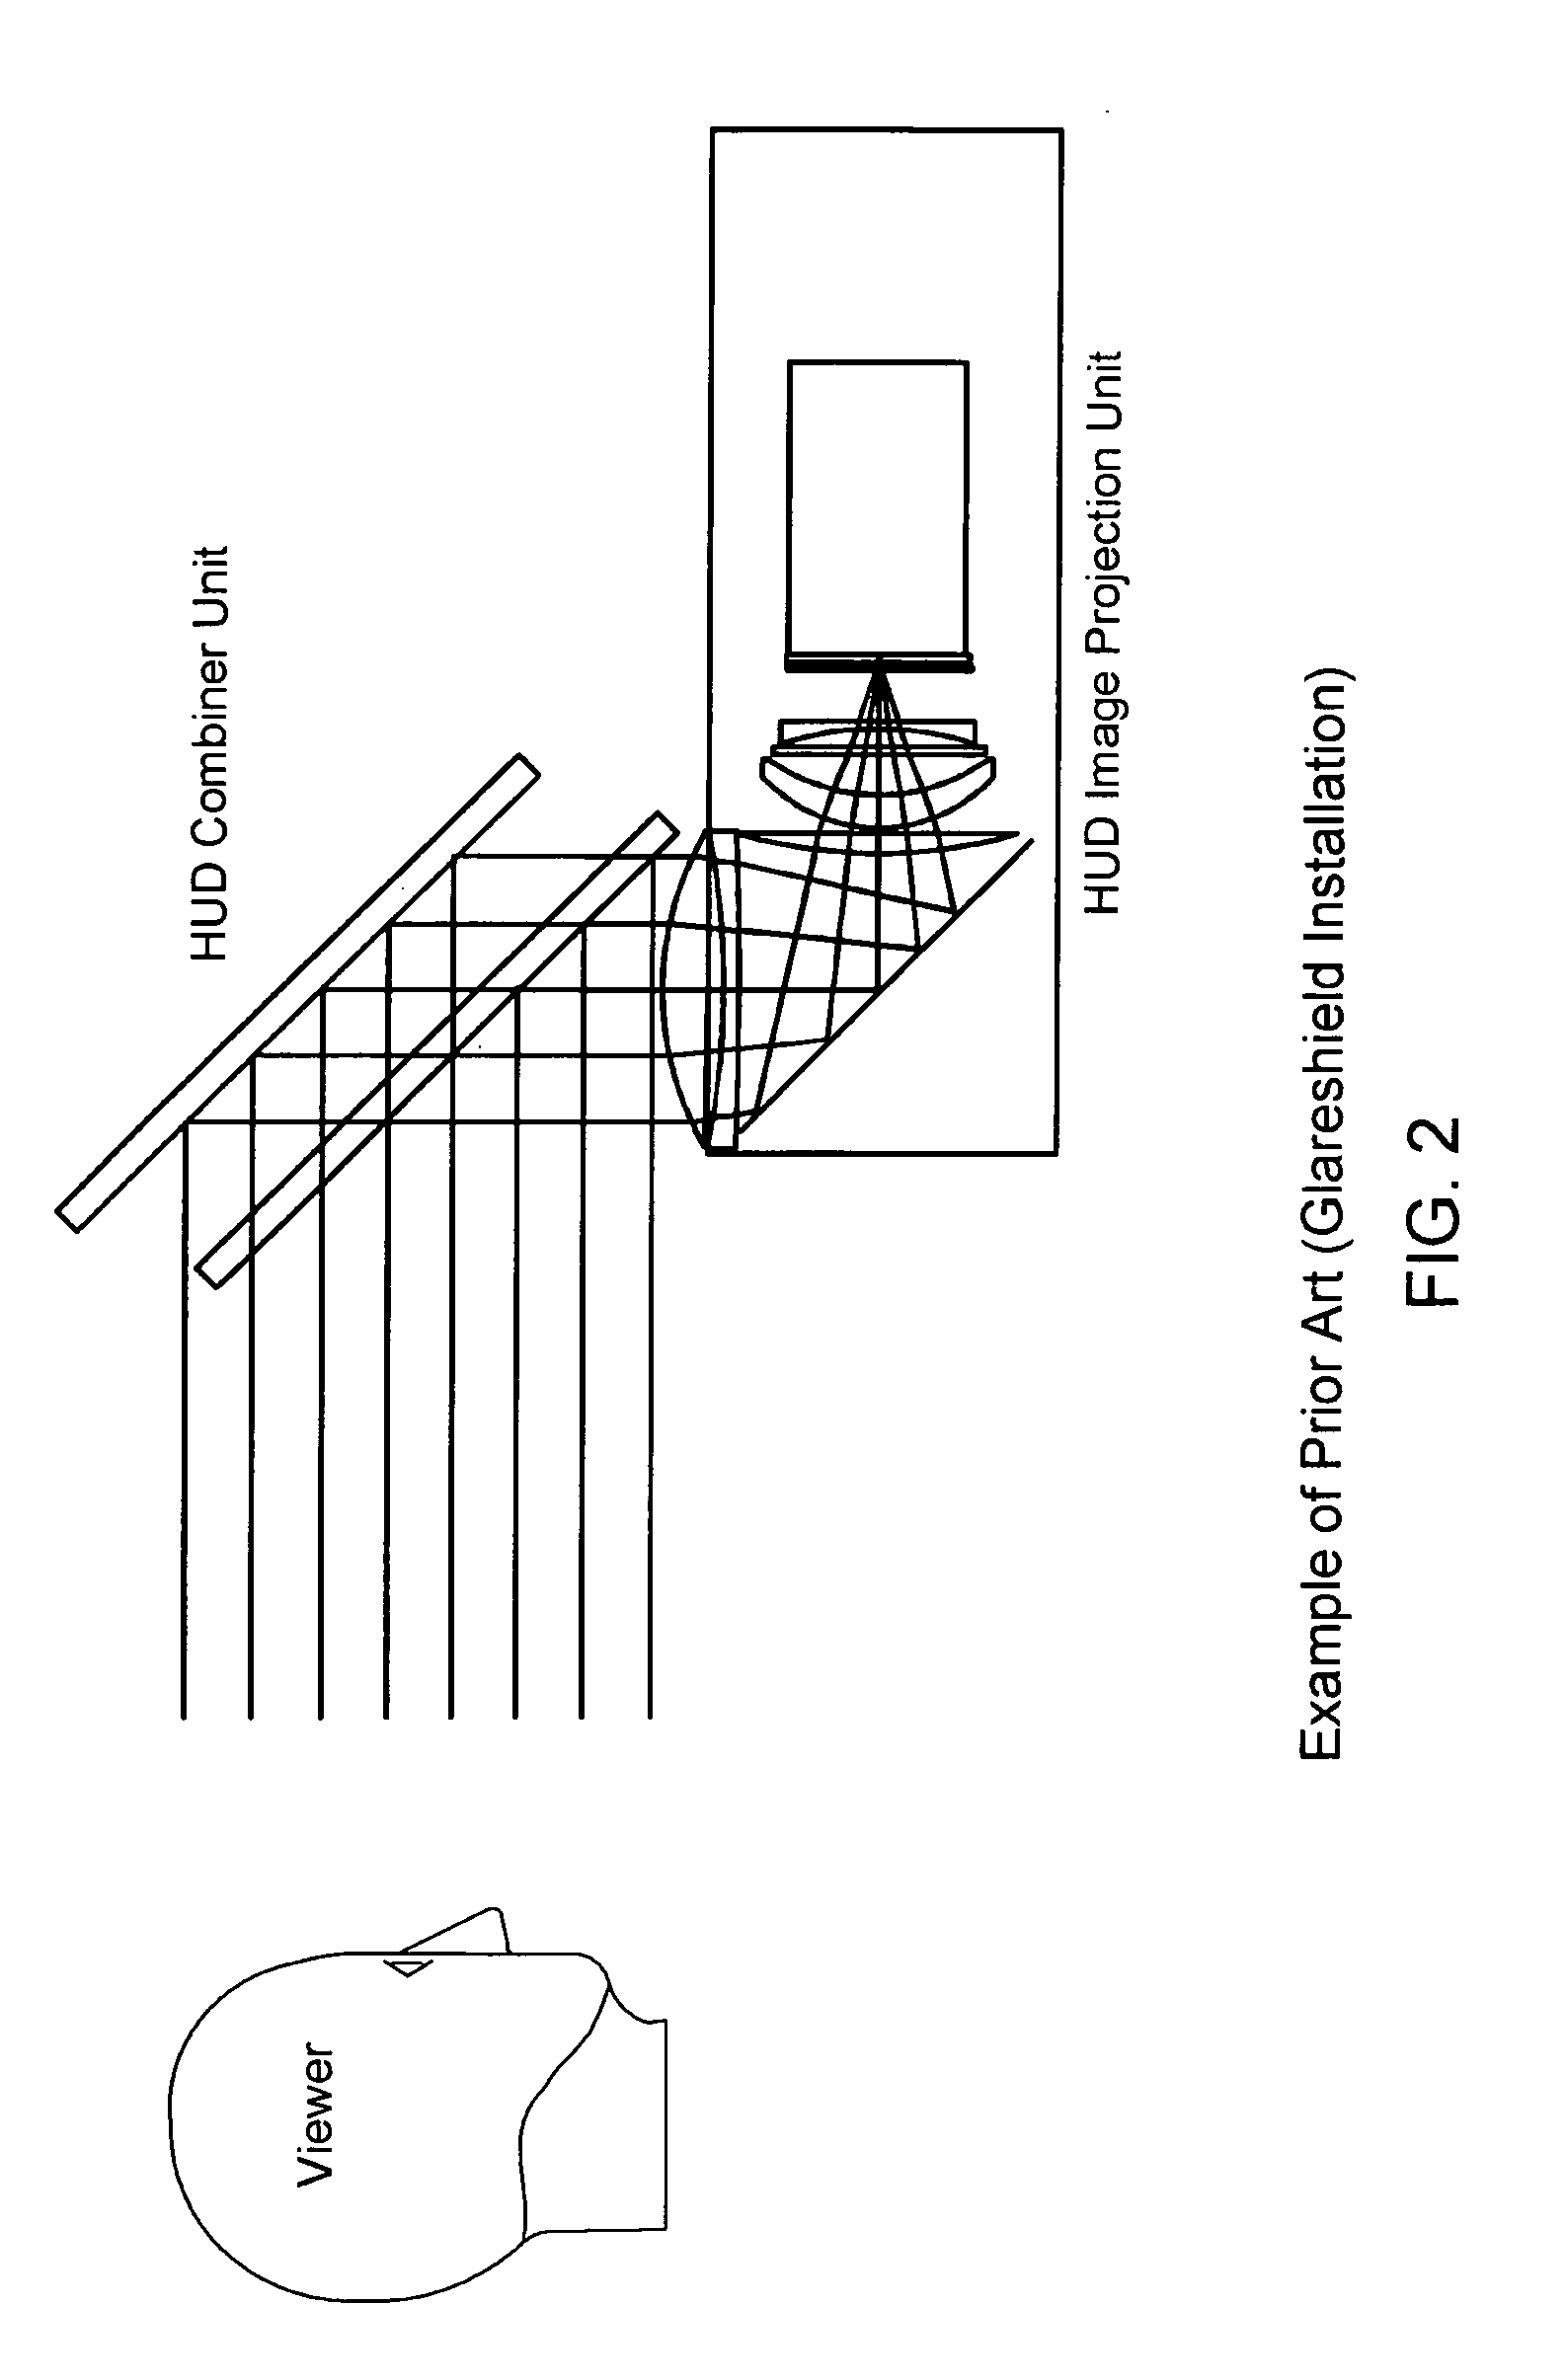 Catadioptric system, apparatus, and method for producing images on a universal, head-up display